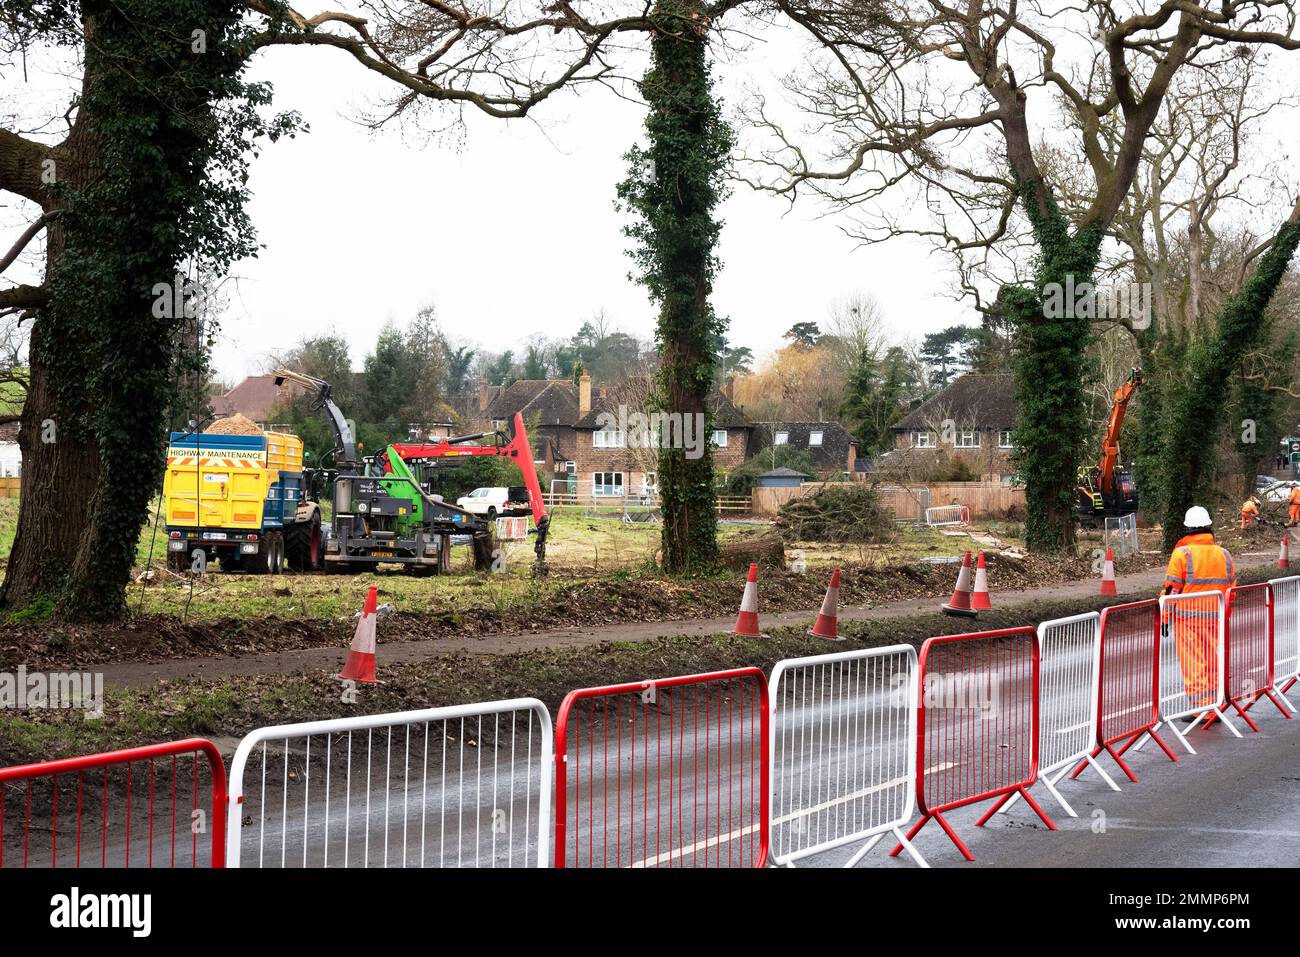 Hartwell, Aylesbury, UK. January 29th 2023. A413 road closure and mass tree felling by HS2 Ltd contractors on HS2 land adjacent to a popular well used public path and cycle way. HS2 high court injunction affixed to fencing. HS2 contractors with chainsaws cut the base of trees while excavators fitted with grapples assisted in felling them. Motorists were confused and on seeing barriers blocking the main road would do hazardous 3 point turns close to a tight bend by the Bugle Horn pub. Credit: Stephen Bell/Alamy Live News Stock Photo